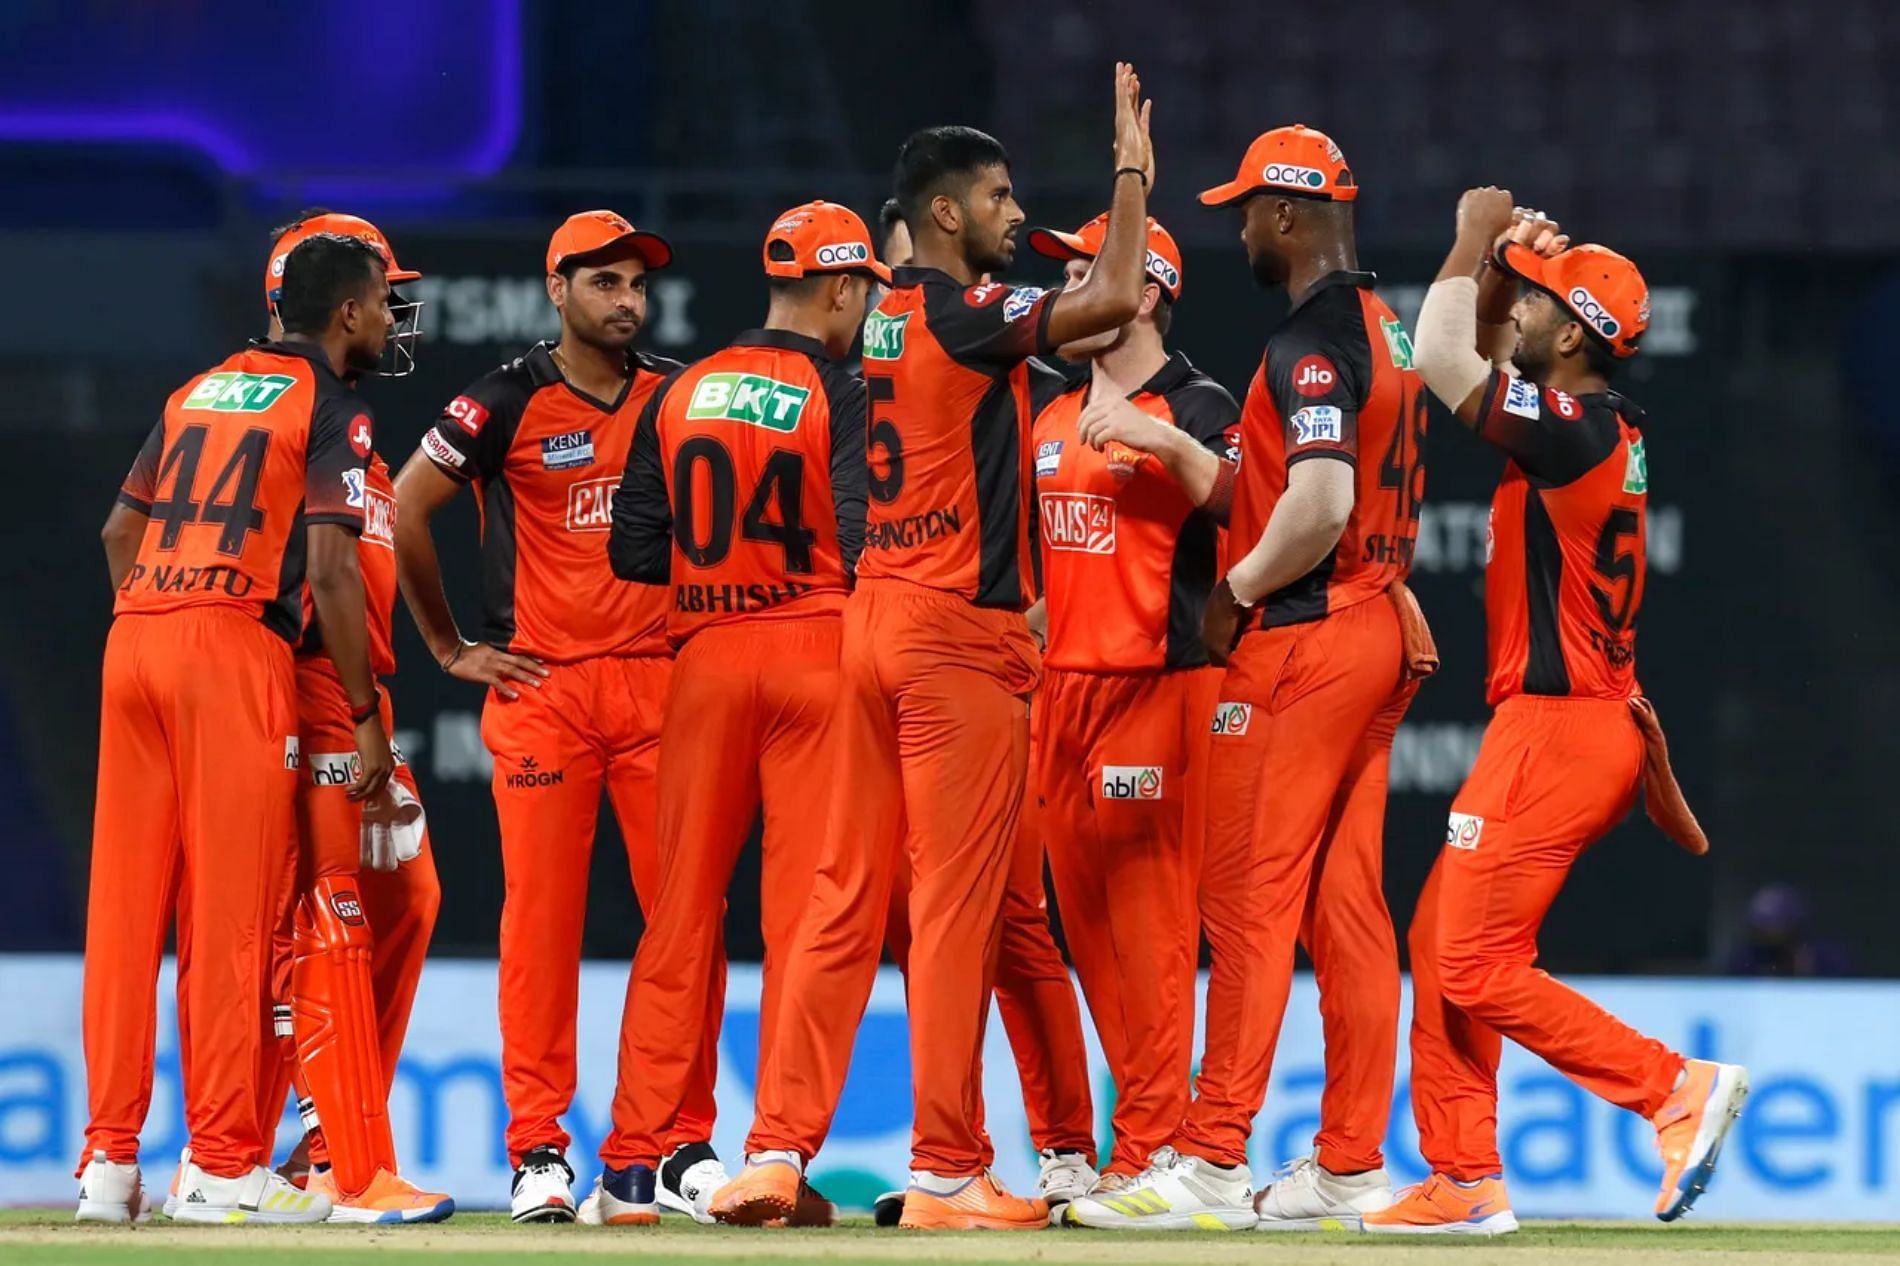 SRH vs CSK LIVE IPL 2022: All you want to know about Sunrisers Hyderabad vs Chennai Super Kings match, SRH vs CSK Top Dream11 Fantasy Picks, Team news, SRH Playing XI, CSK Playing XI, Match Timing & SRH vs CSK LIVE Streaming Details